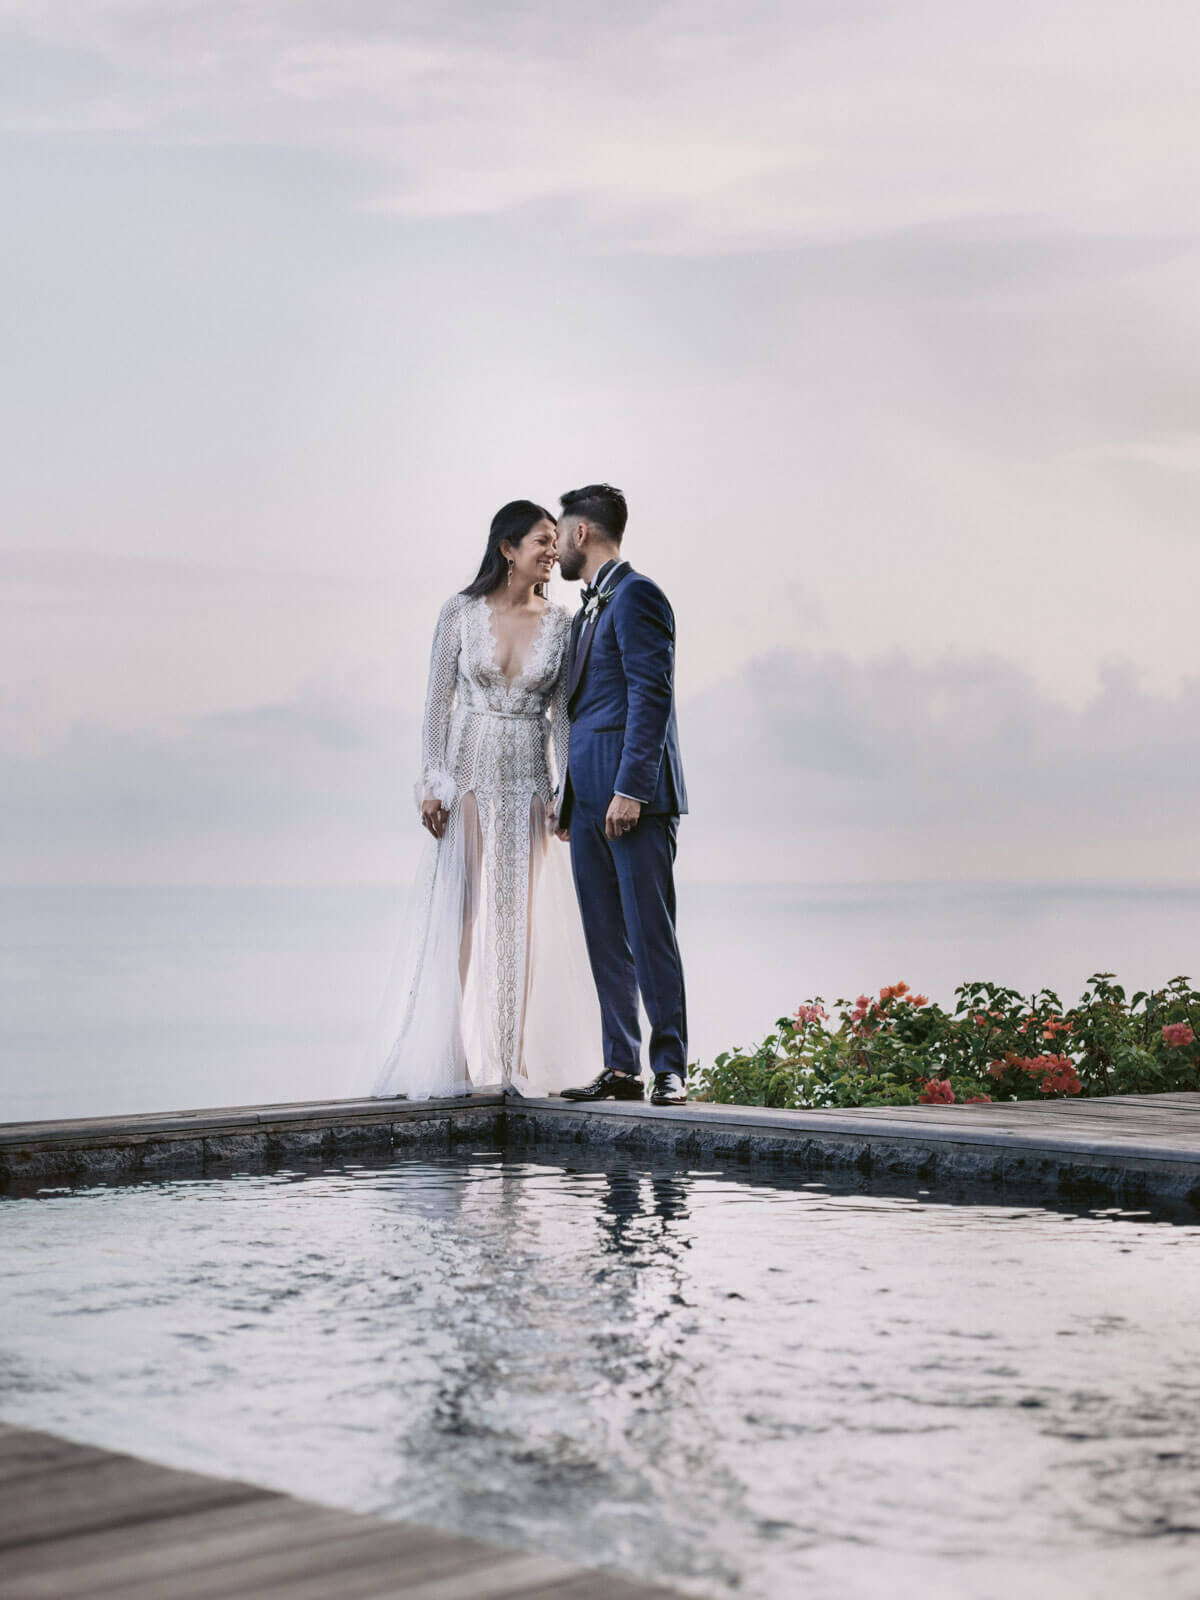 The bride and groom are romantically facing each other at the edge of a pool in Khayangan Estate, Indonesia. Image by Jenny Fu Studio